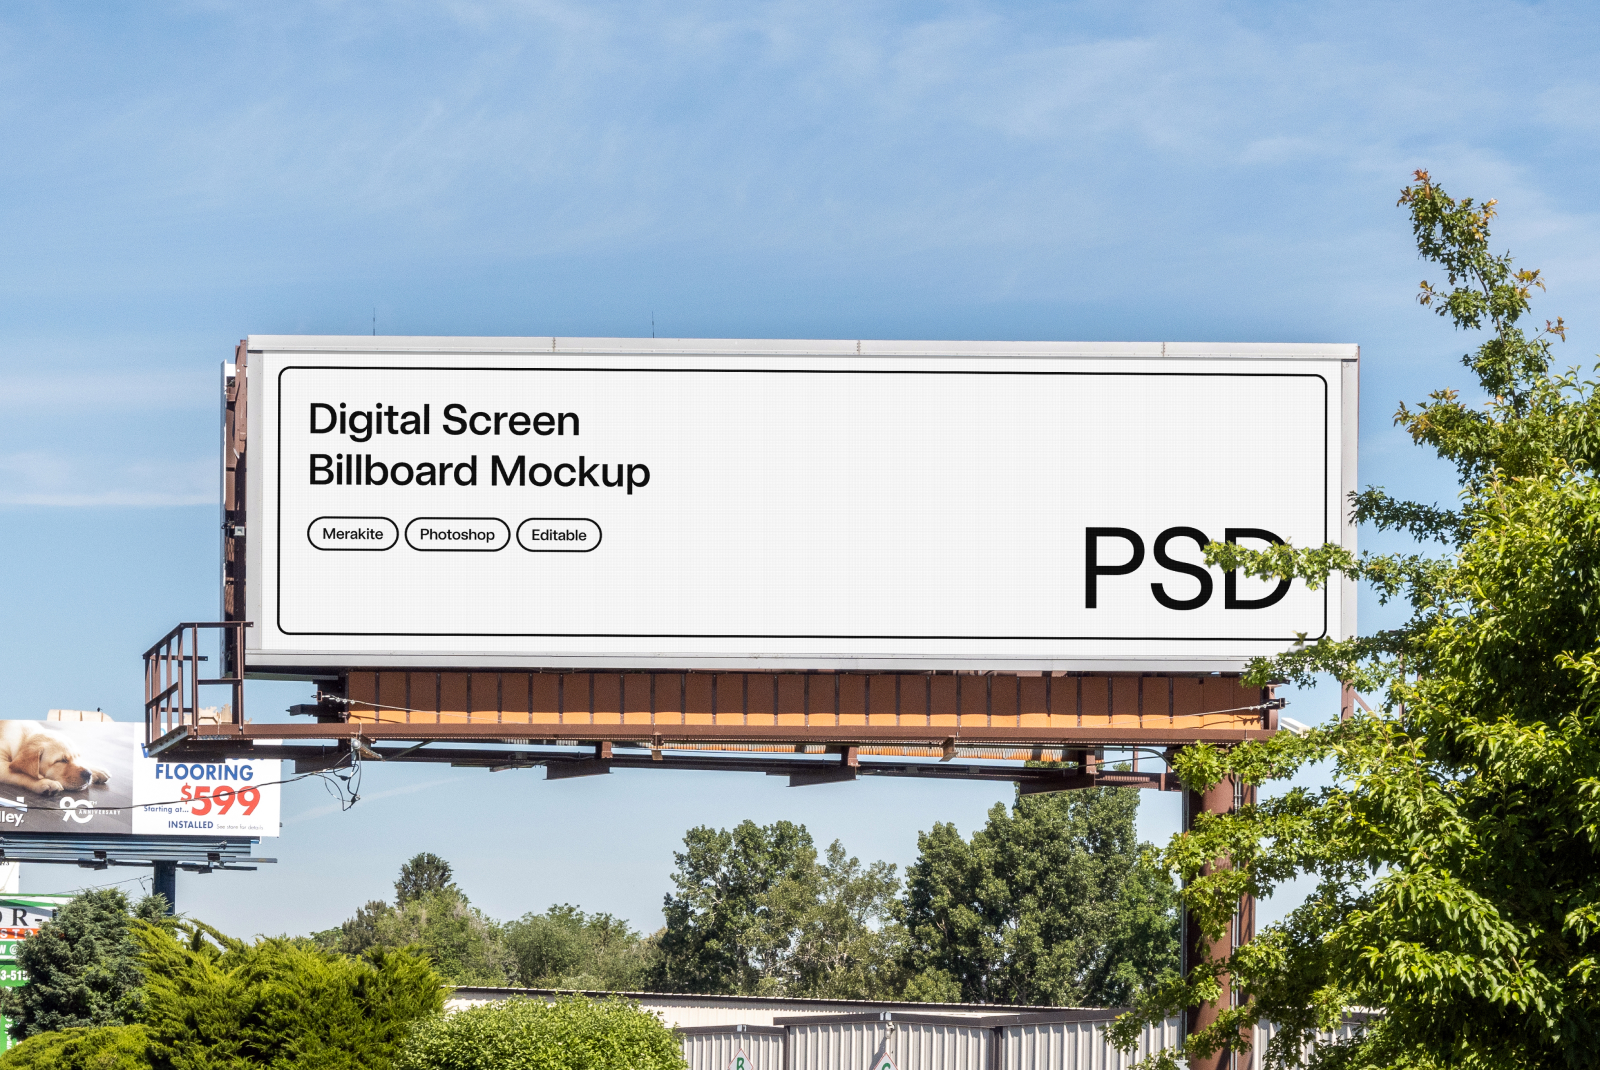 Outdoor billboard mockup in a natural setting with editable PSD format, perfect for advertising and design presentations.